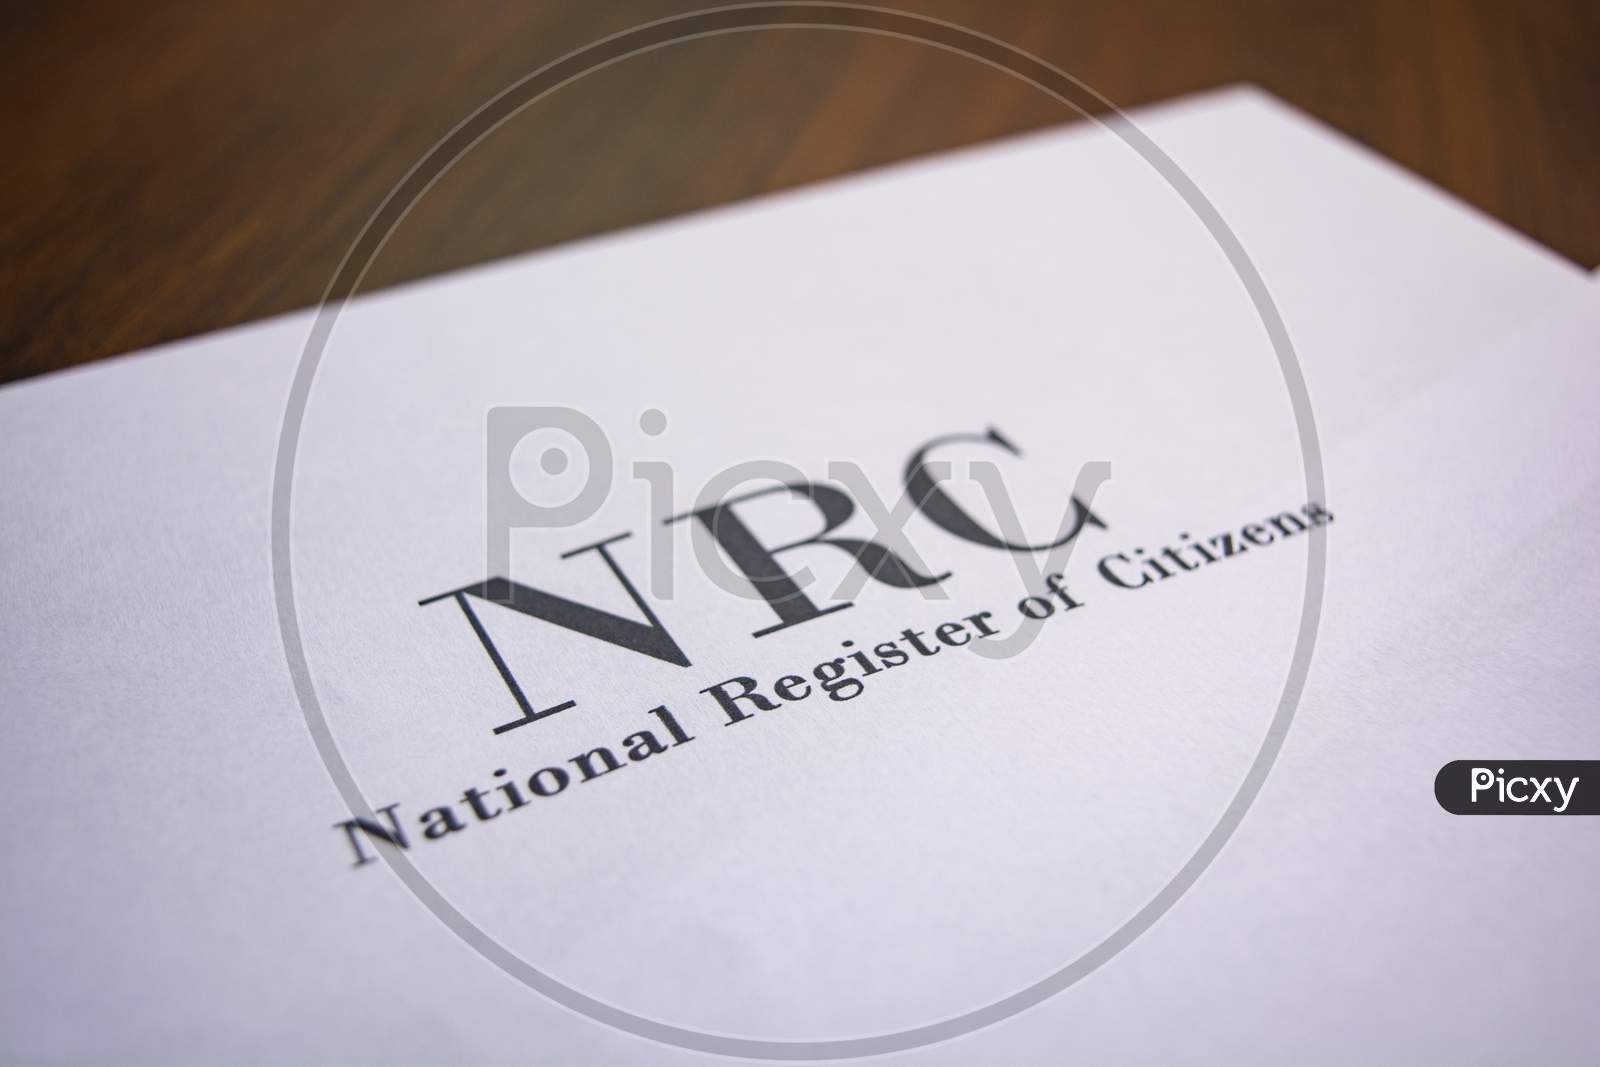 Nrc Or National Register Of Citizens Printed On Paper.